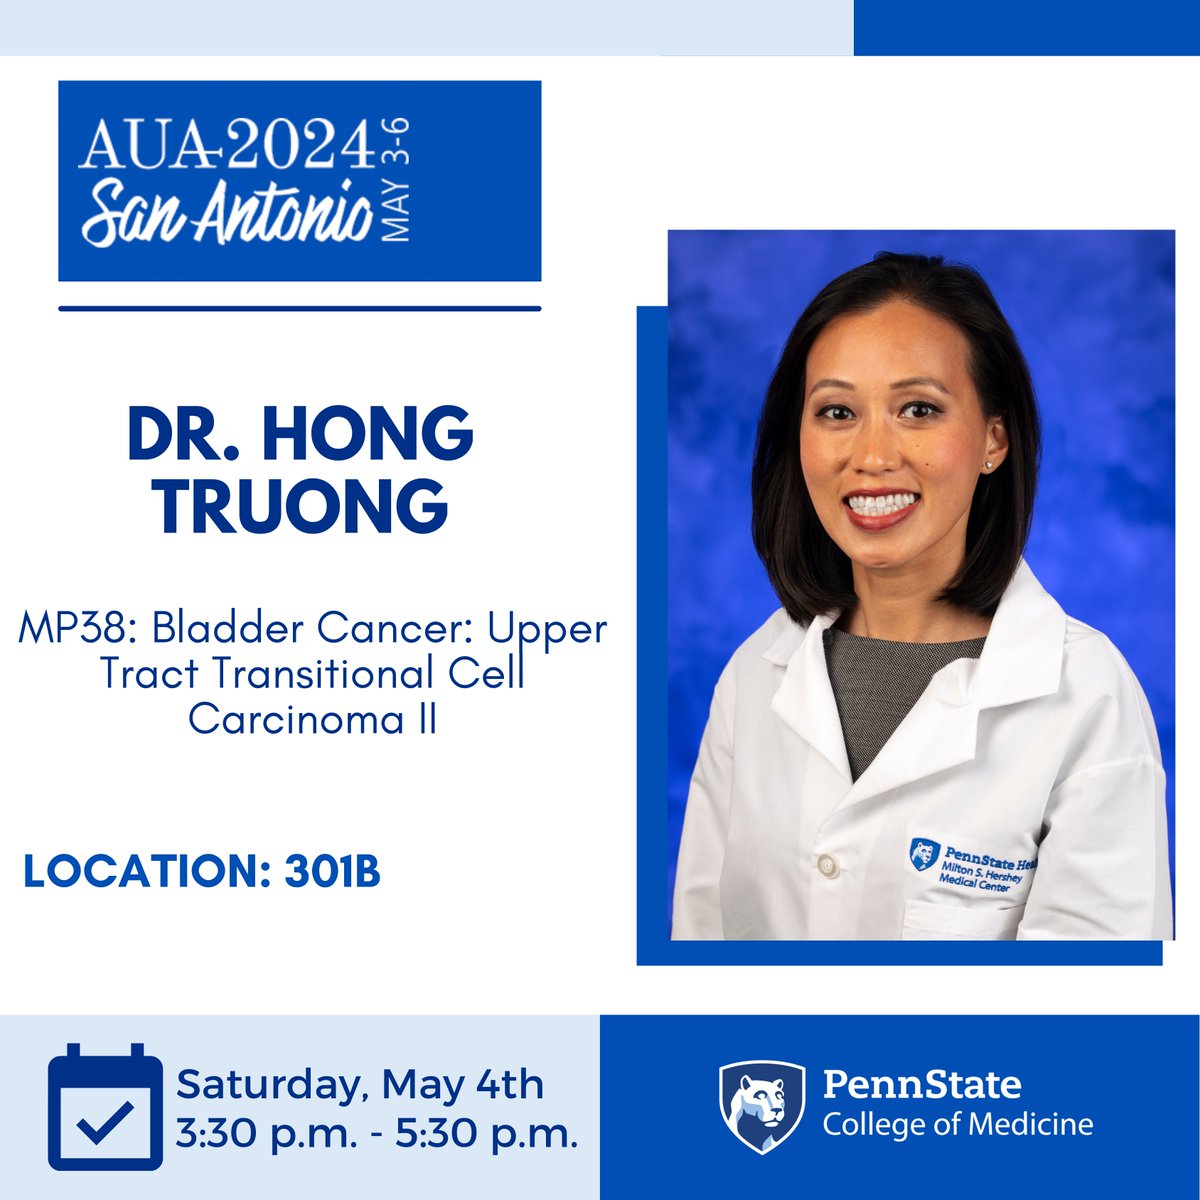 Dr. @HongTruongMD is hosting a session on bladder cancer in 301B from 3:30 pm - 5:30 pm. Make sure to check it out! #AUA24 #AUA2024 #UroSoMe #Urology #SanAntonio